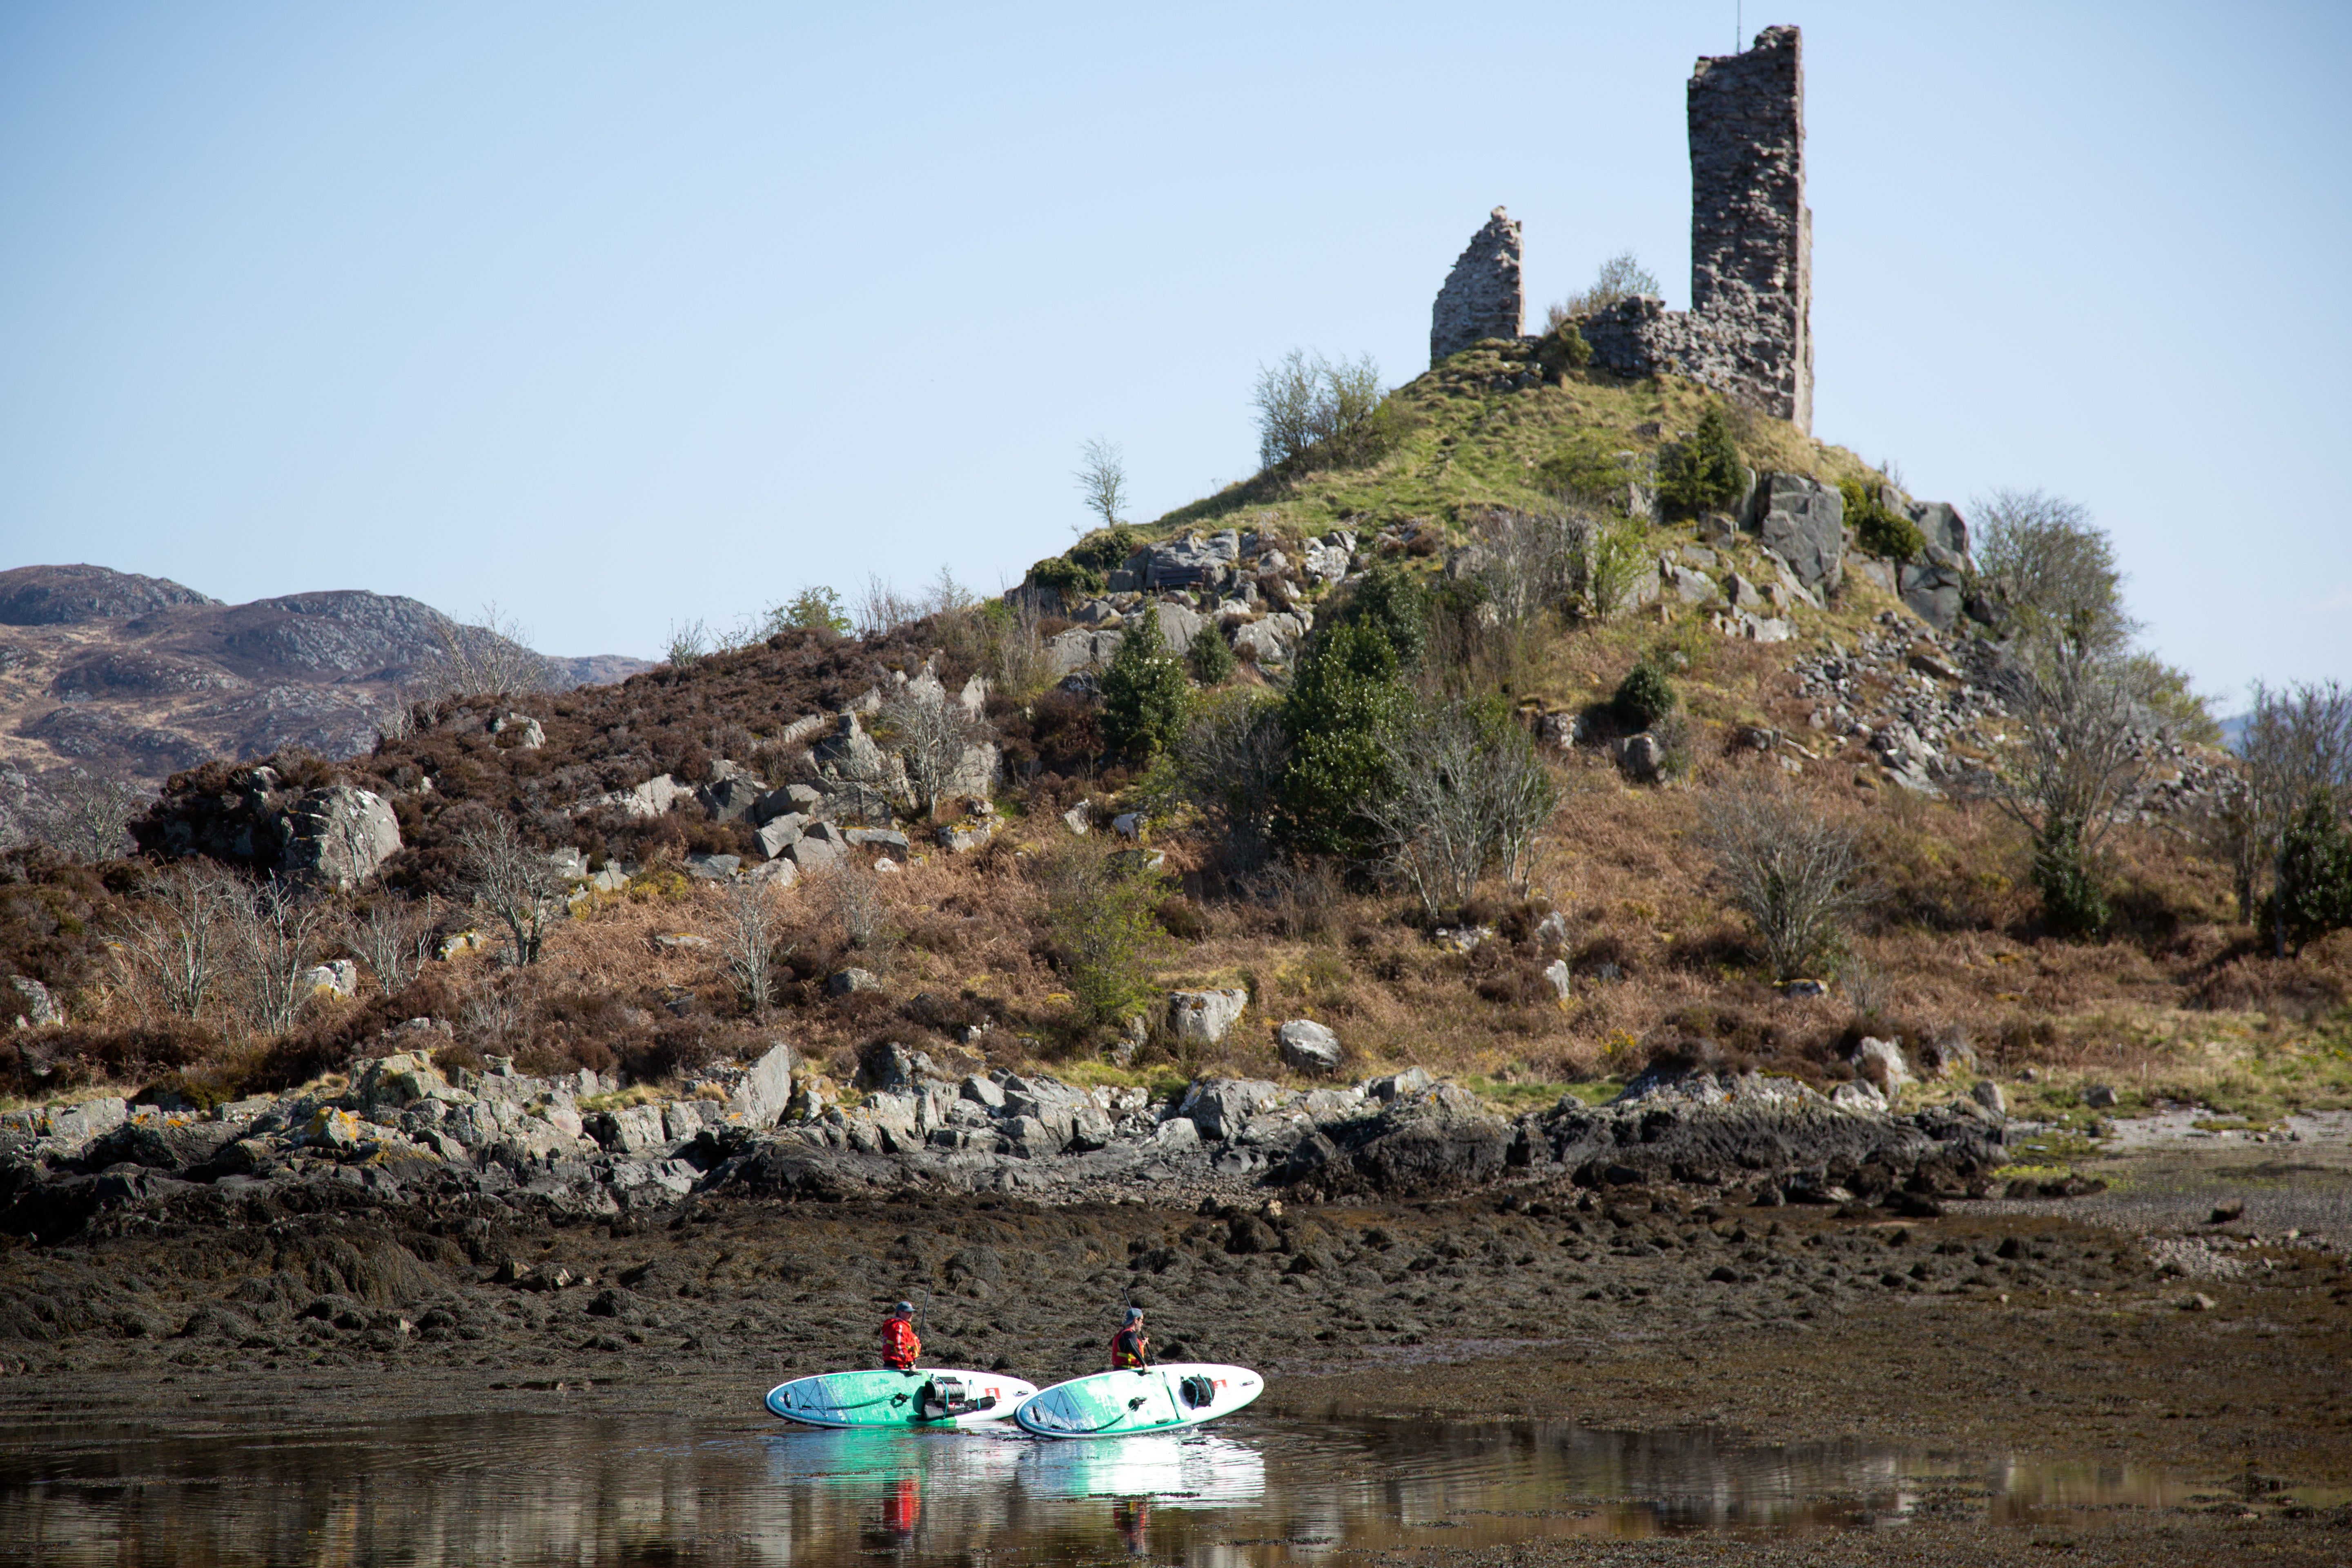 Paddleboarding lets you get up close and personal with Skye’s coastline